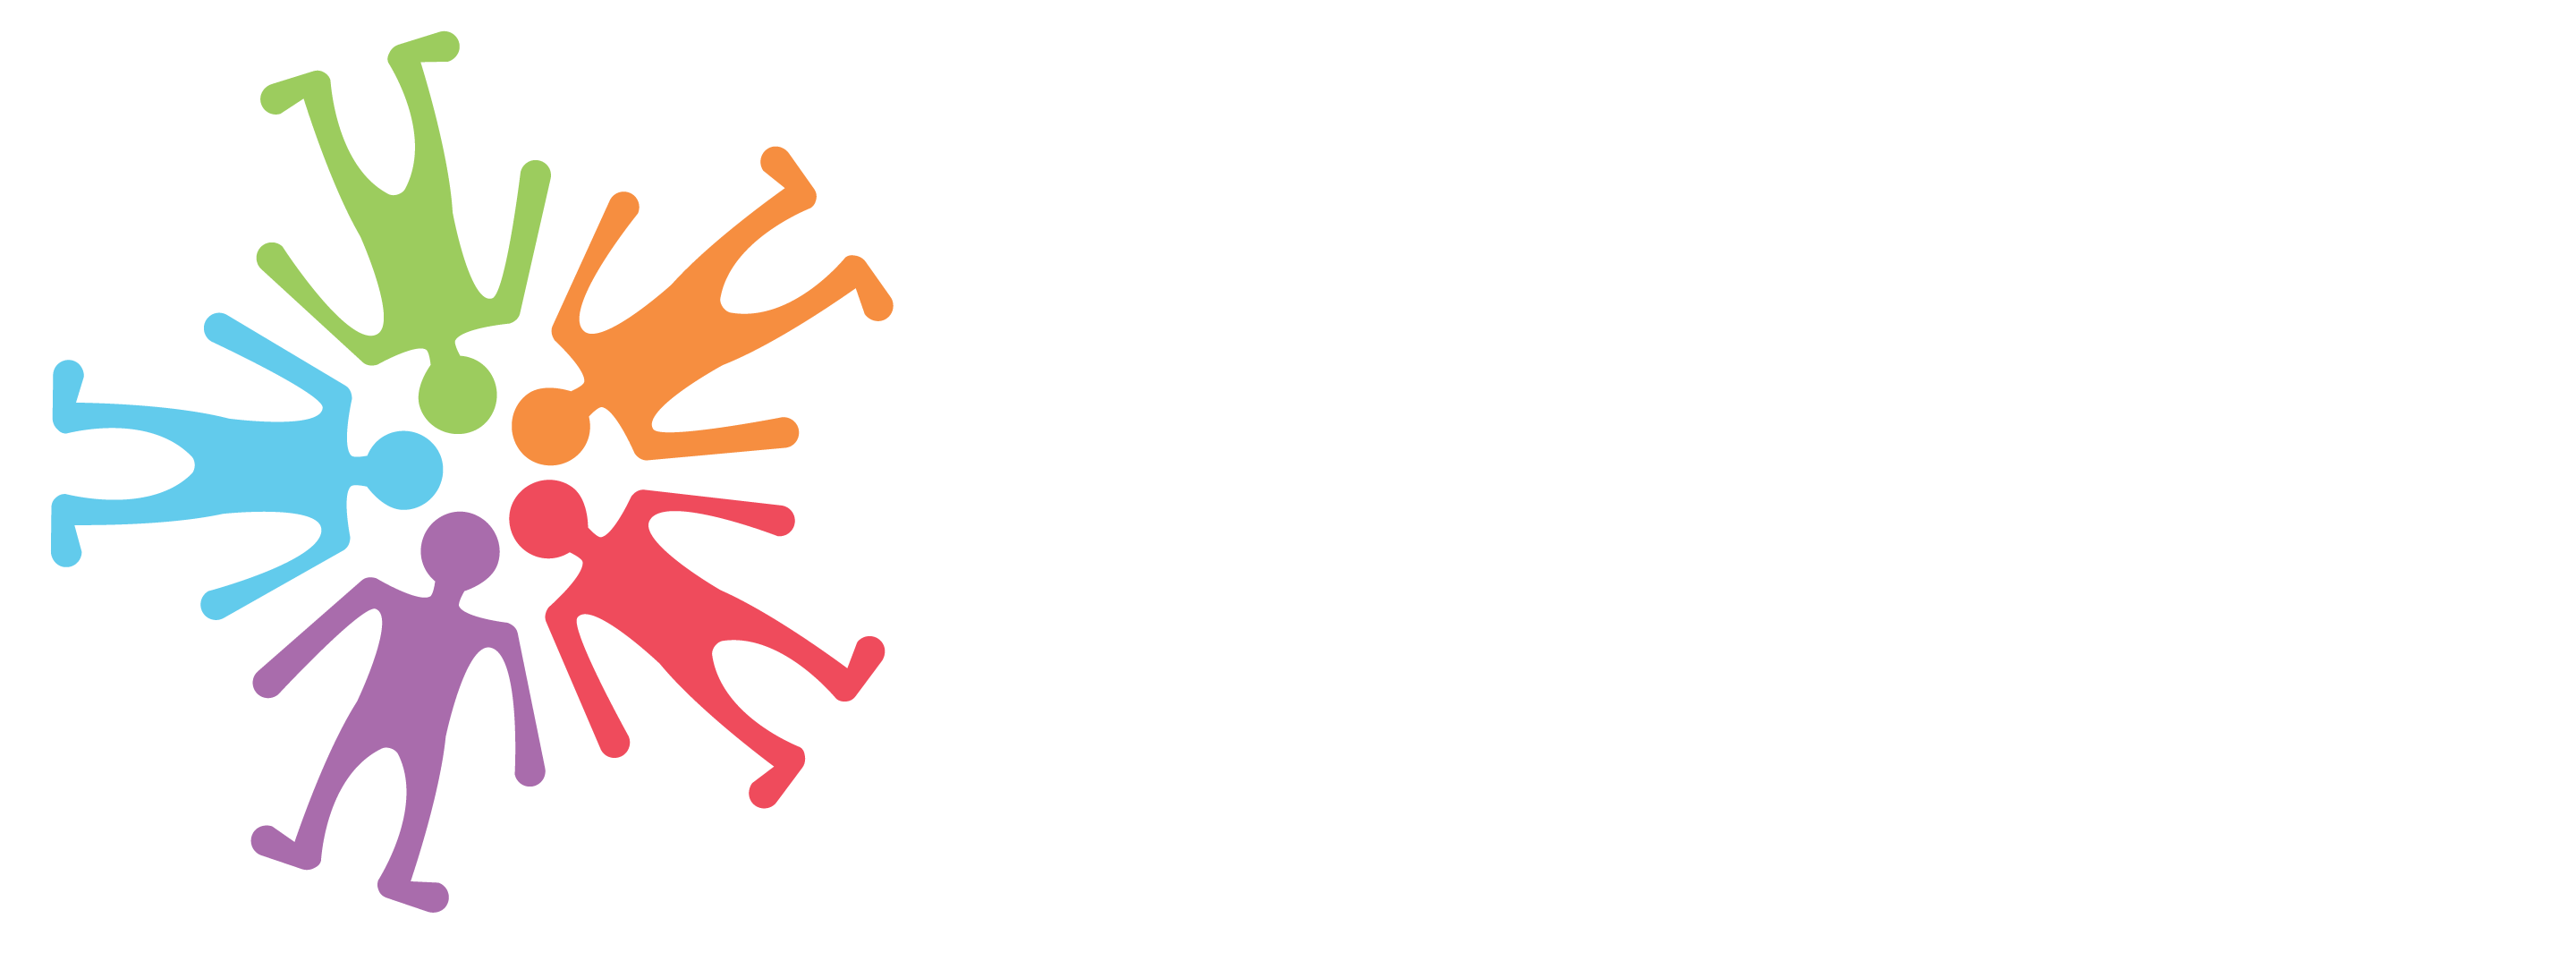 VIRTUAL MEDICAL ANALYTICS SUPPORT SERVICES